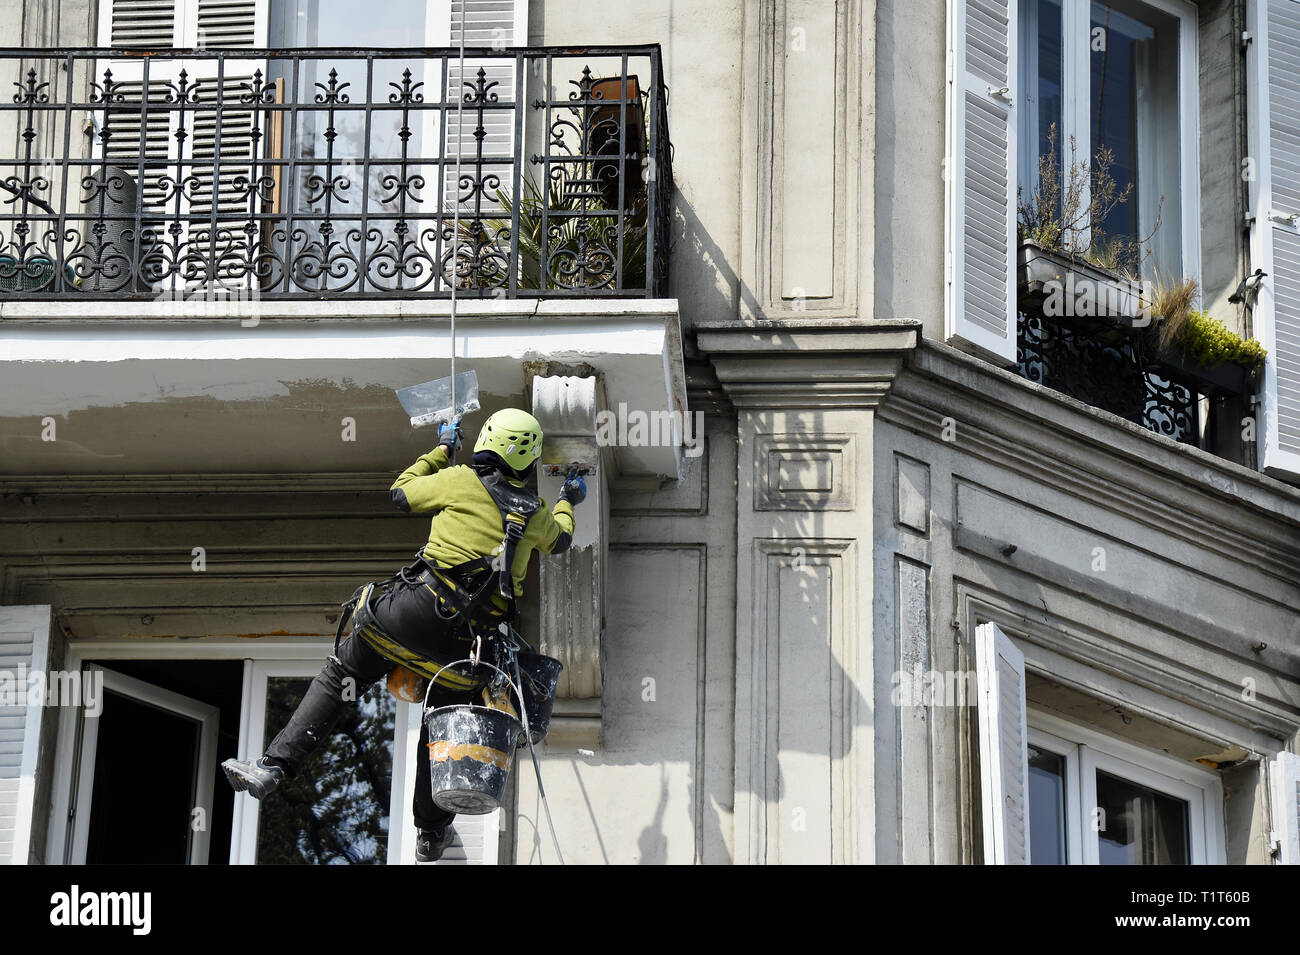 Worker at height - Place de Clichy - Paris - France Stock Photo